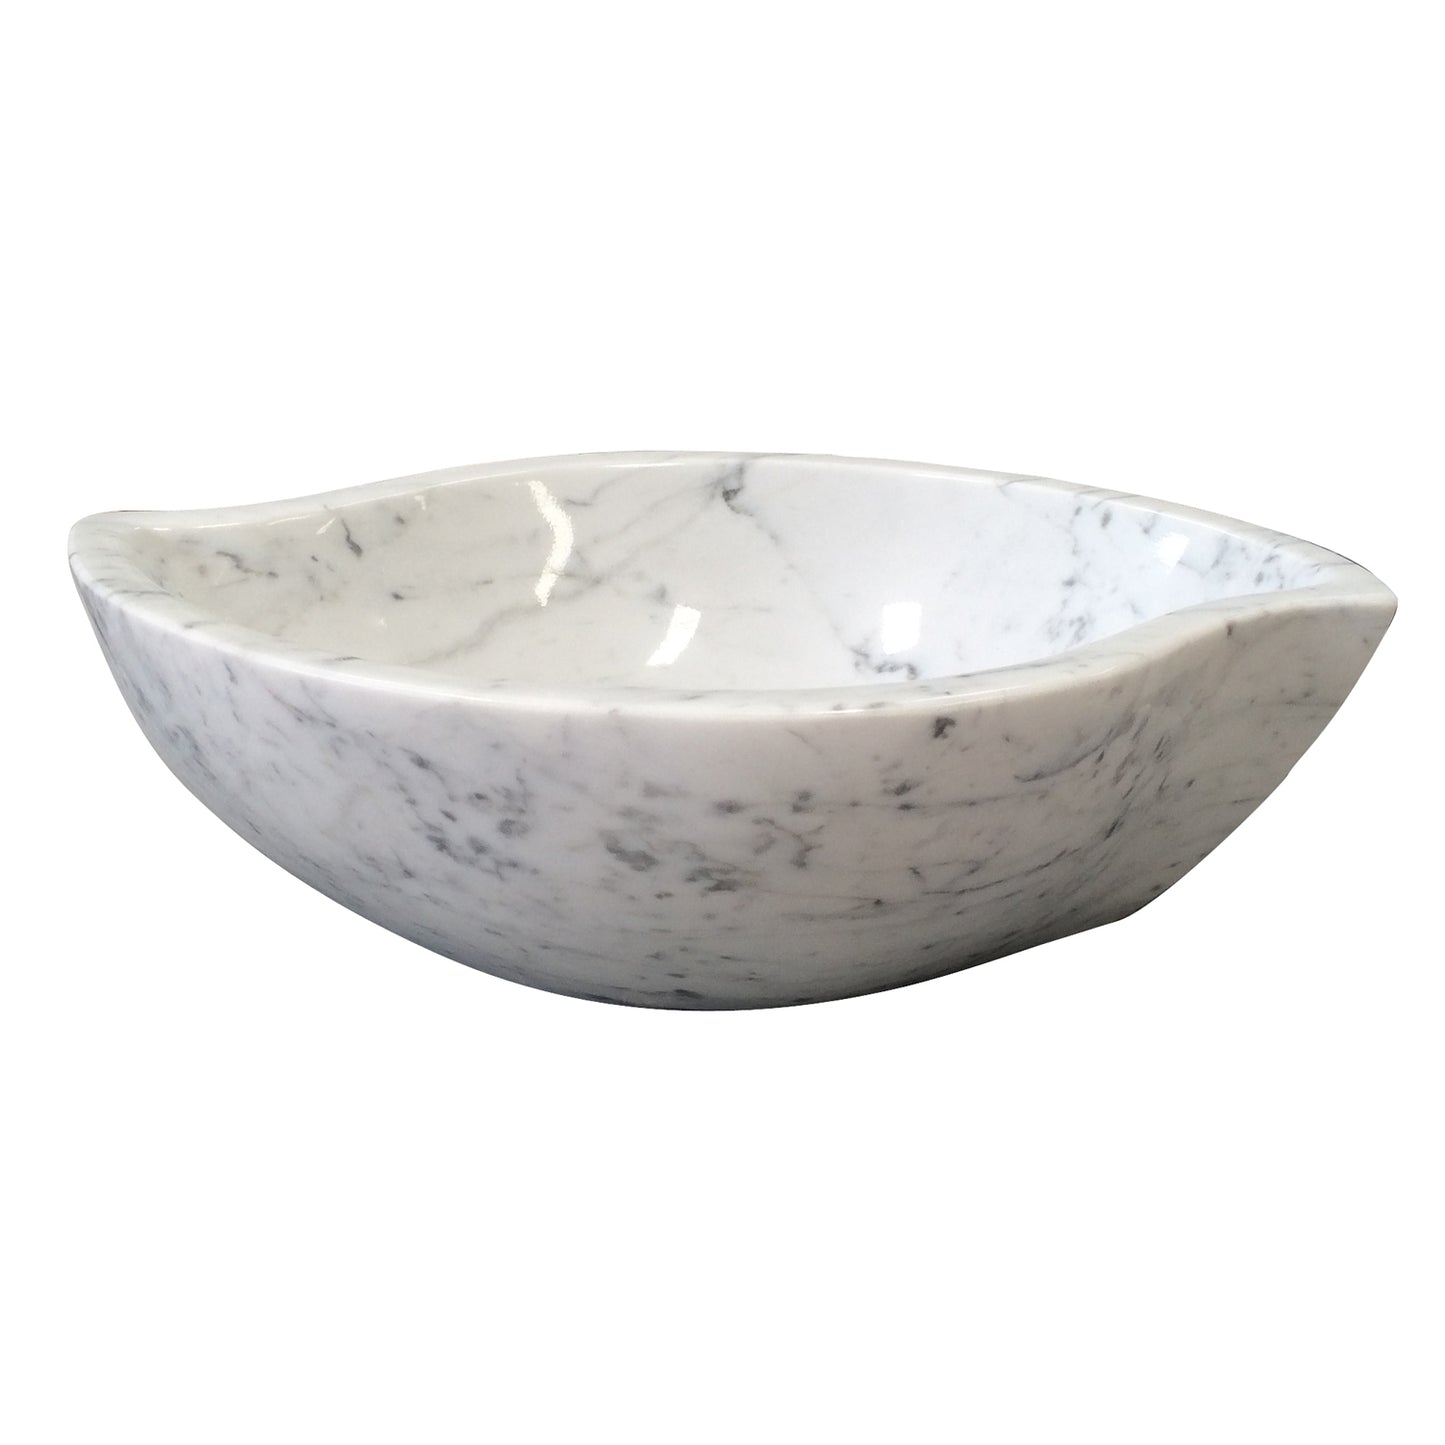 Canim Carrara Marble Vessel Sink with Polished Finish